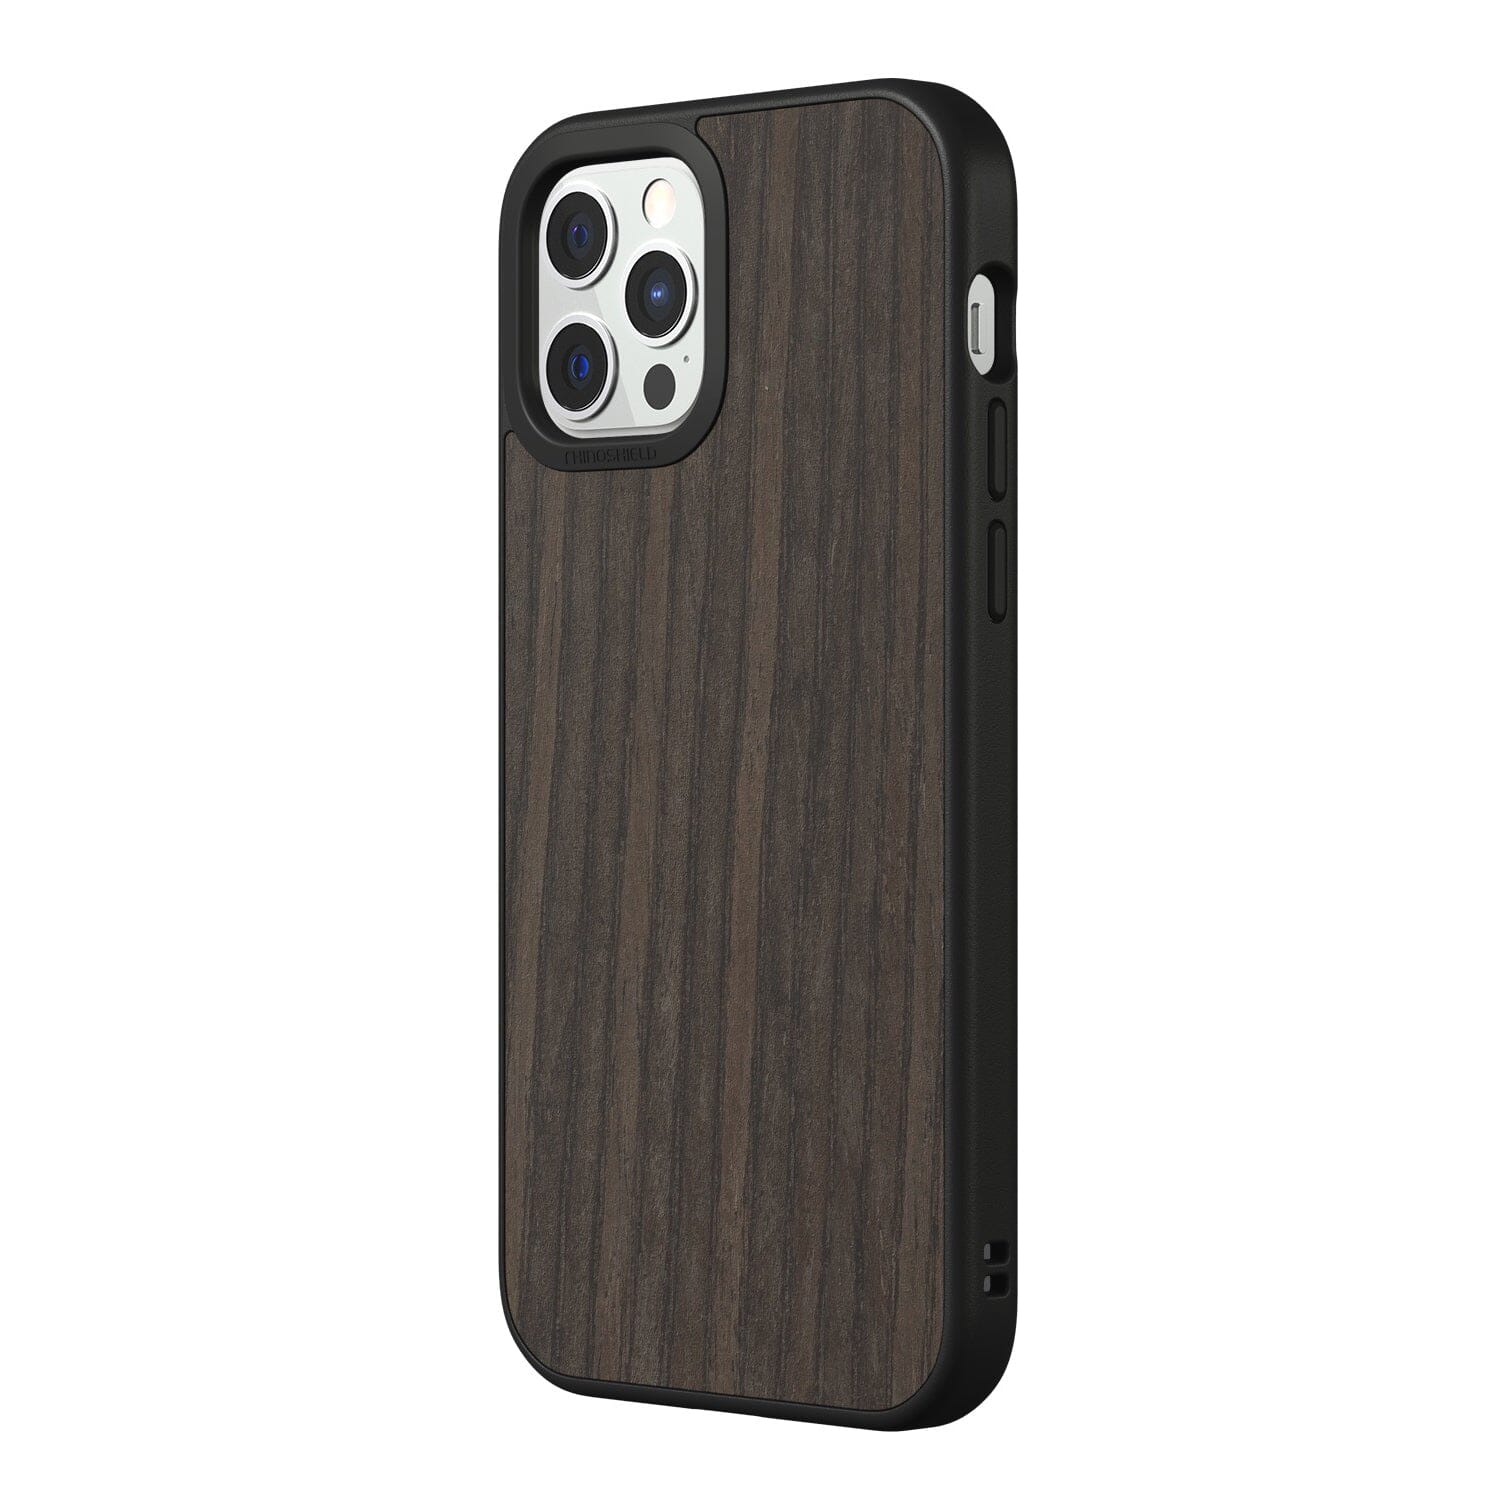 RhinoShield SolidSuit Protective Case with Premium Finish for iPhone 12 Series (2020) iPhone 12 Series RhinoShield iPhone 12 Pro Max 6.7" Black Oak 